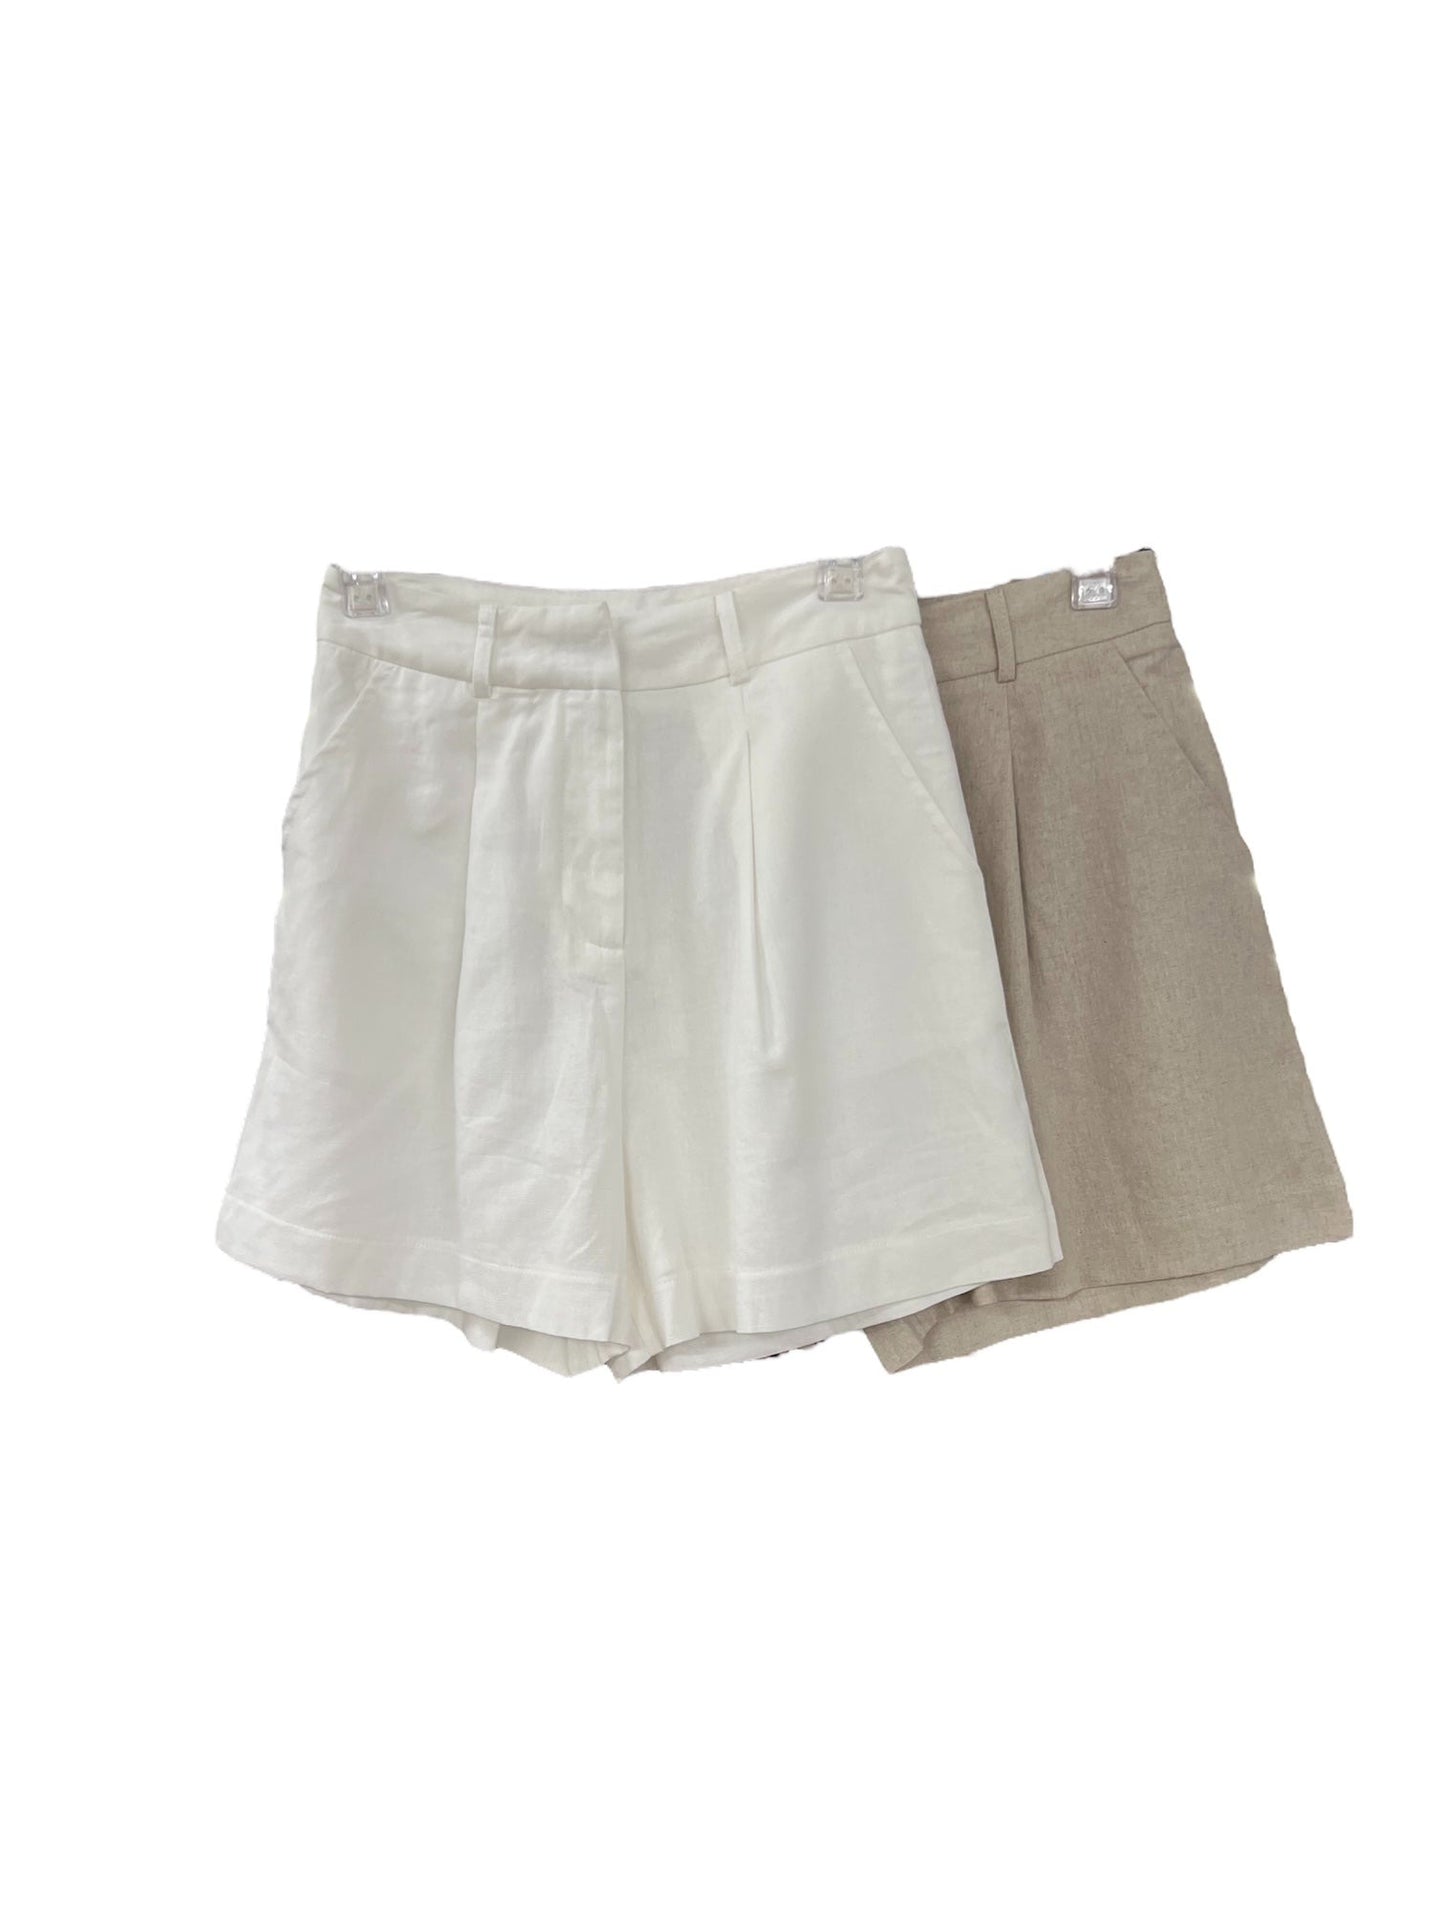 XW20730SS Beige High Waisted Shorts - More Colours Available